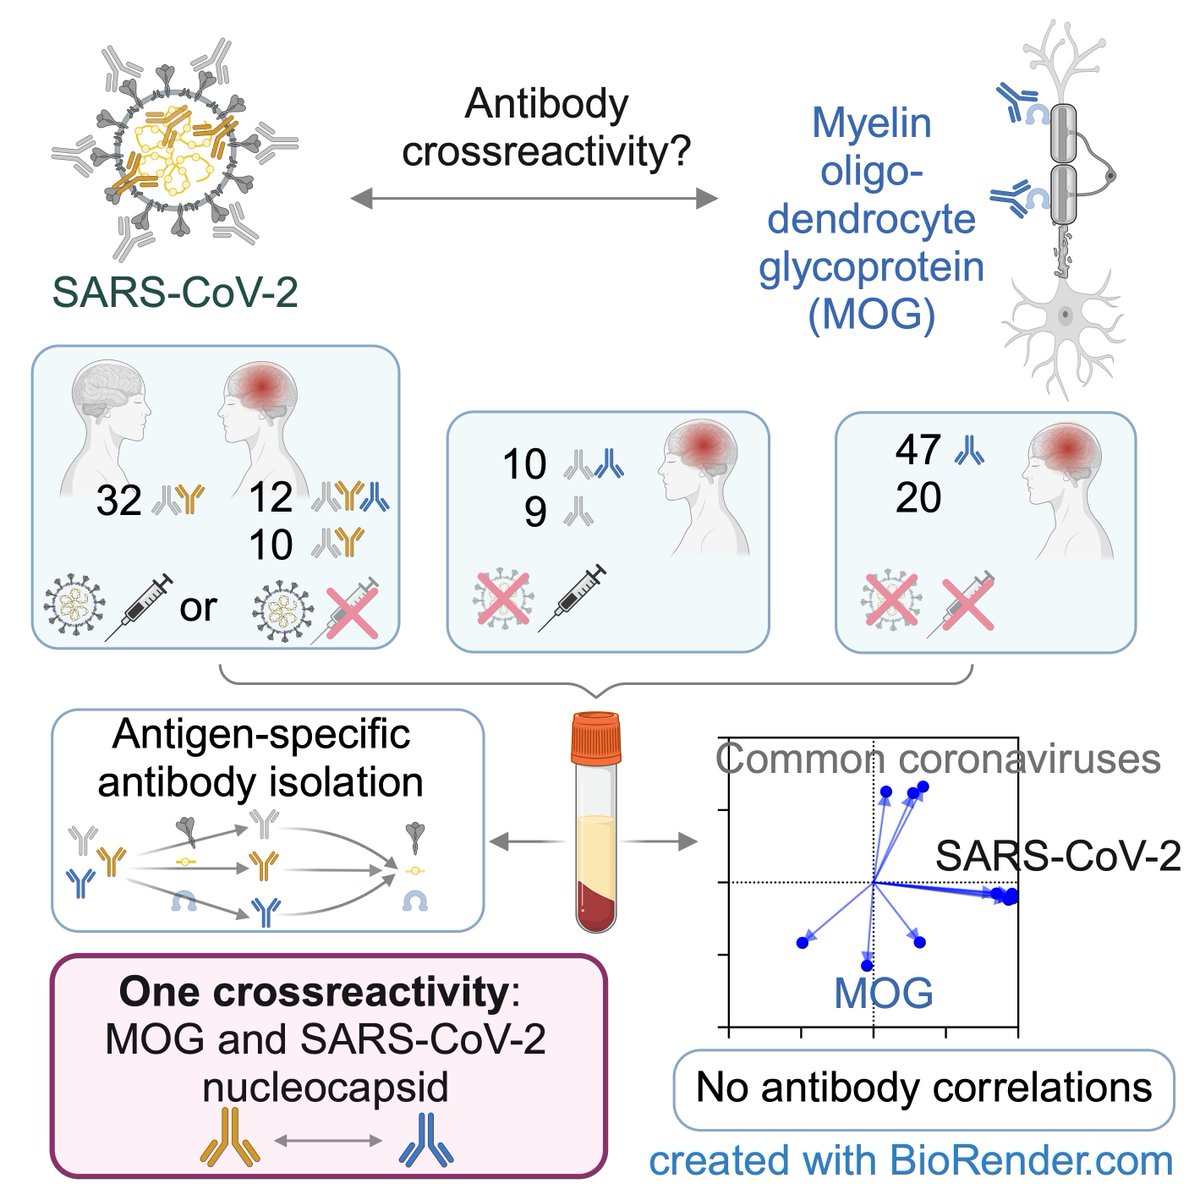 New study from our lab: Is there an immunological cross-reactivity of antibodies to the myelin oligodendrocyte glycoprotein and coronaviruses? academic.oup.com/braincomms/art…